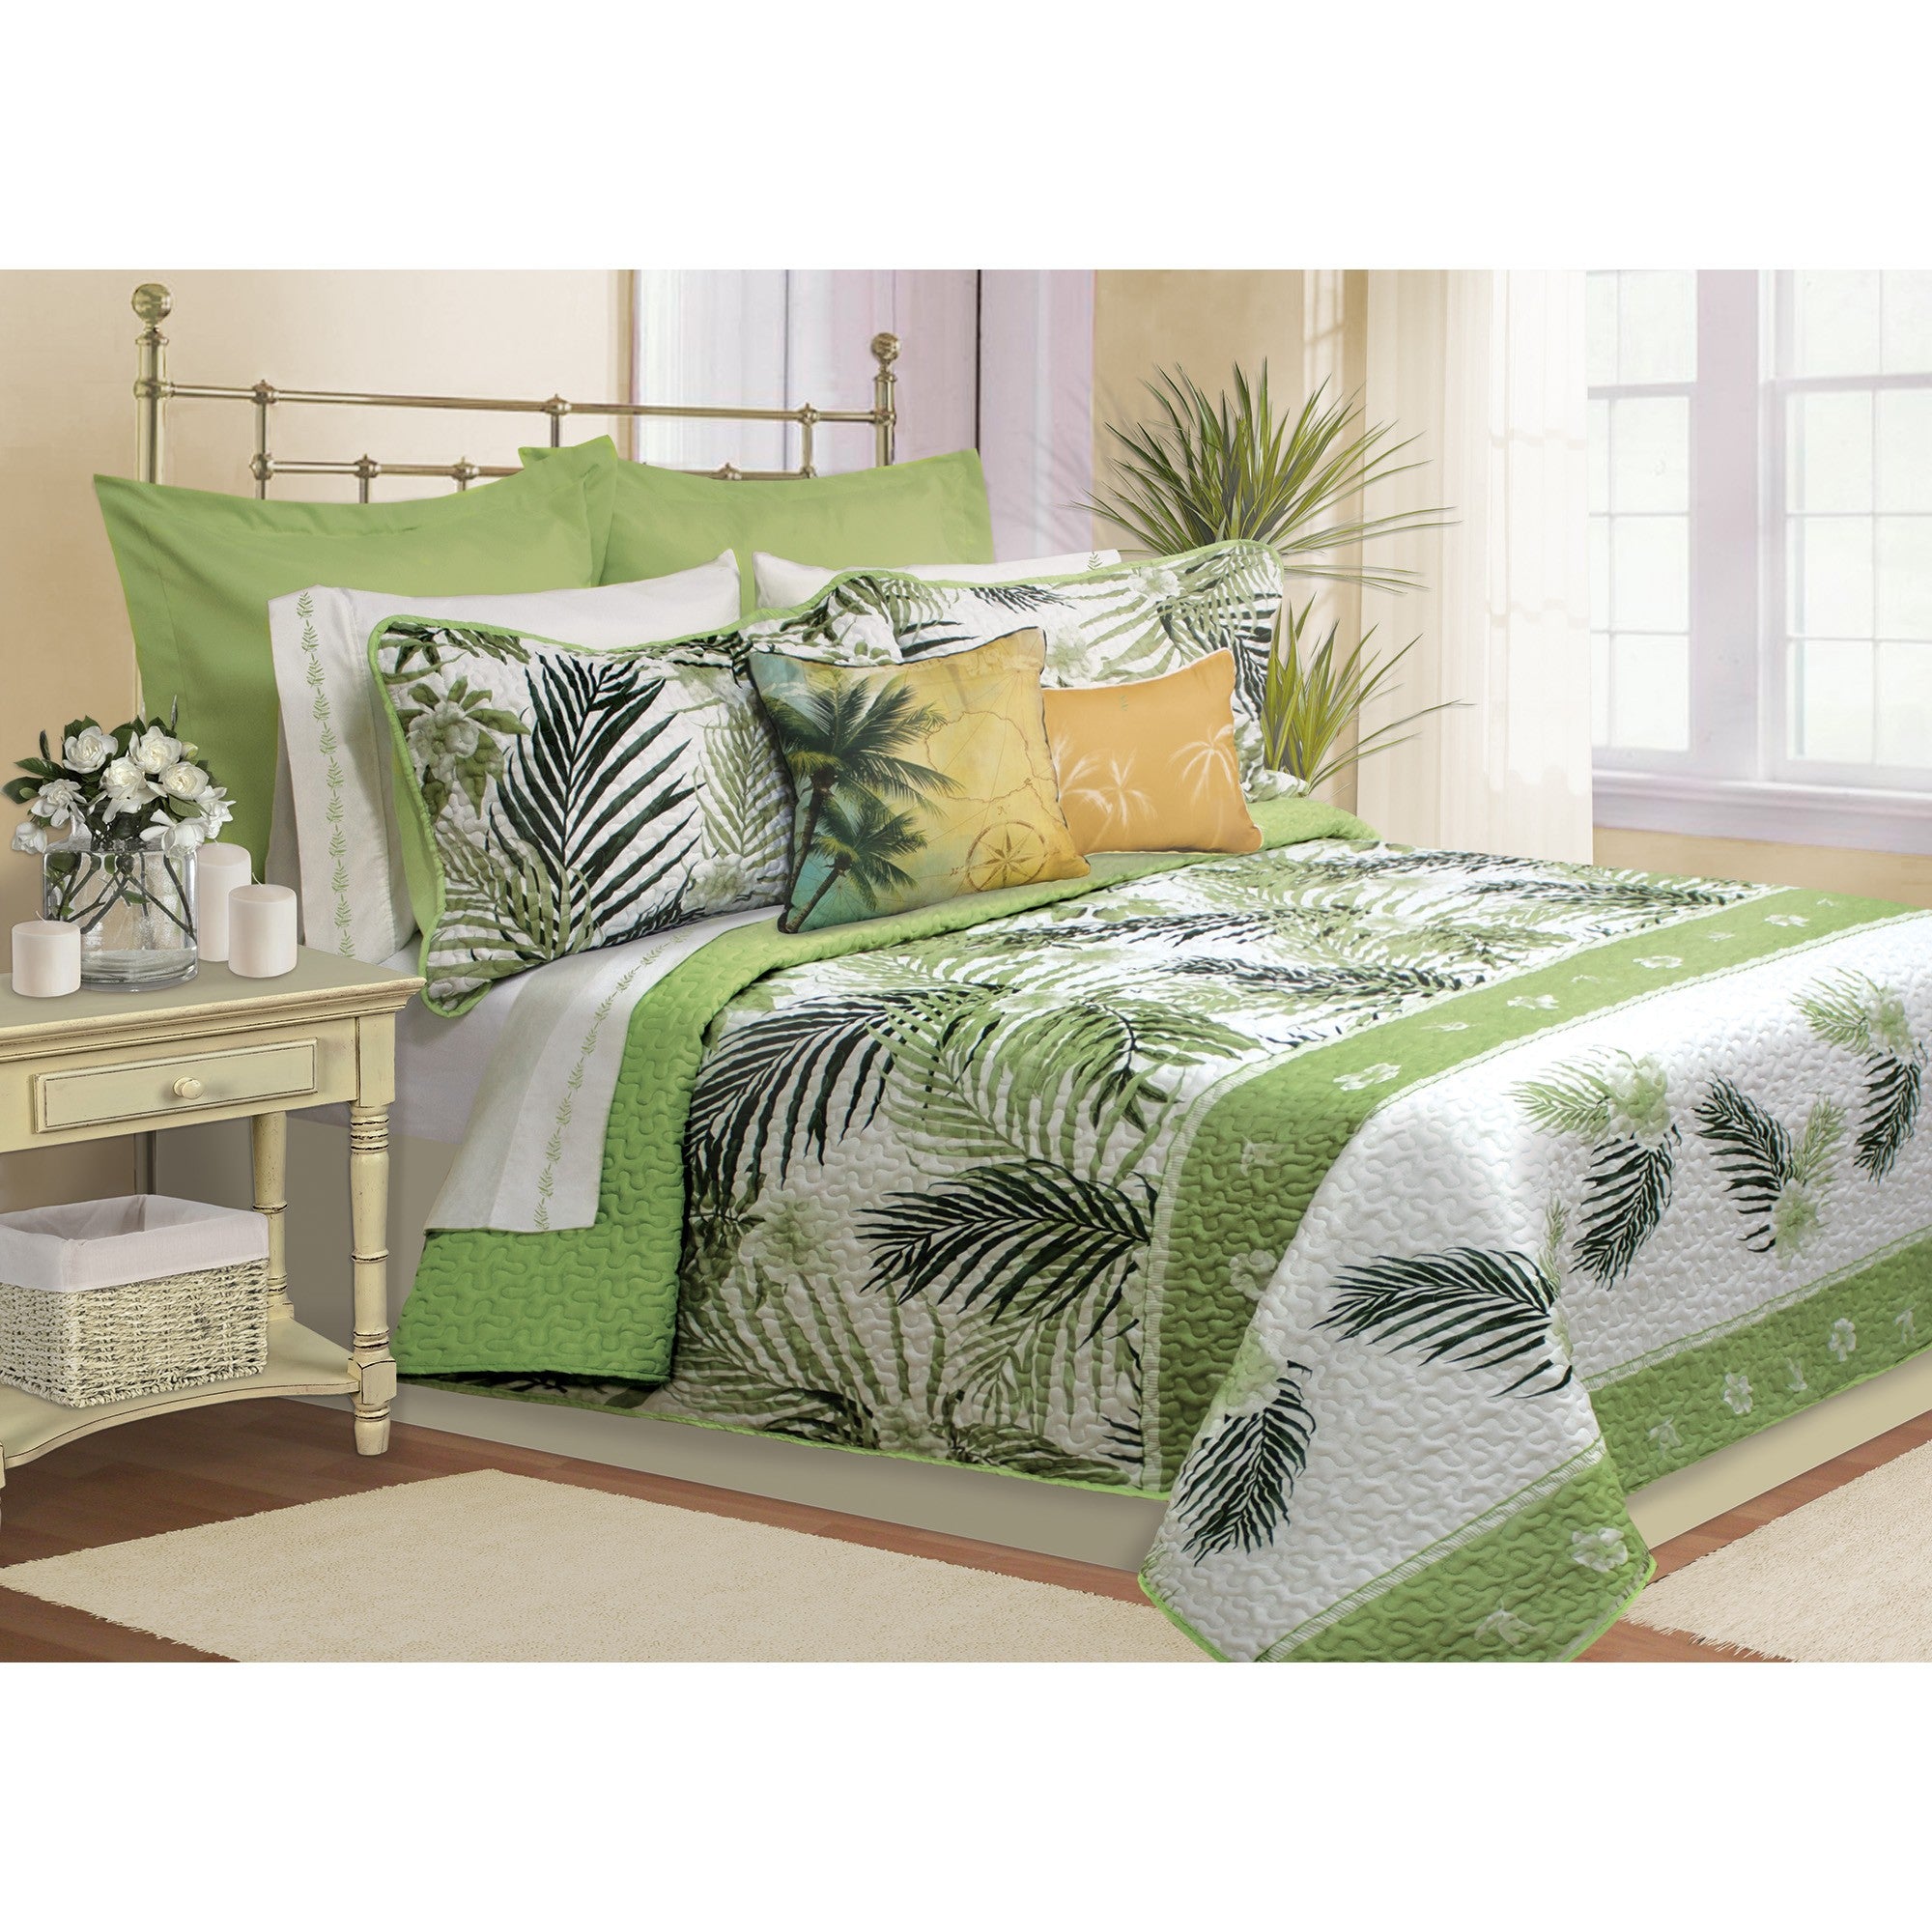 title:Safdie & Co. Quilt 5PC Set DQ Green Tahiti;color:Green